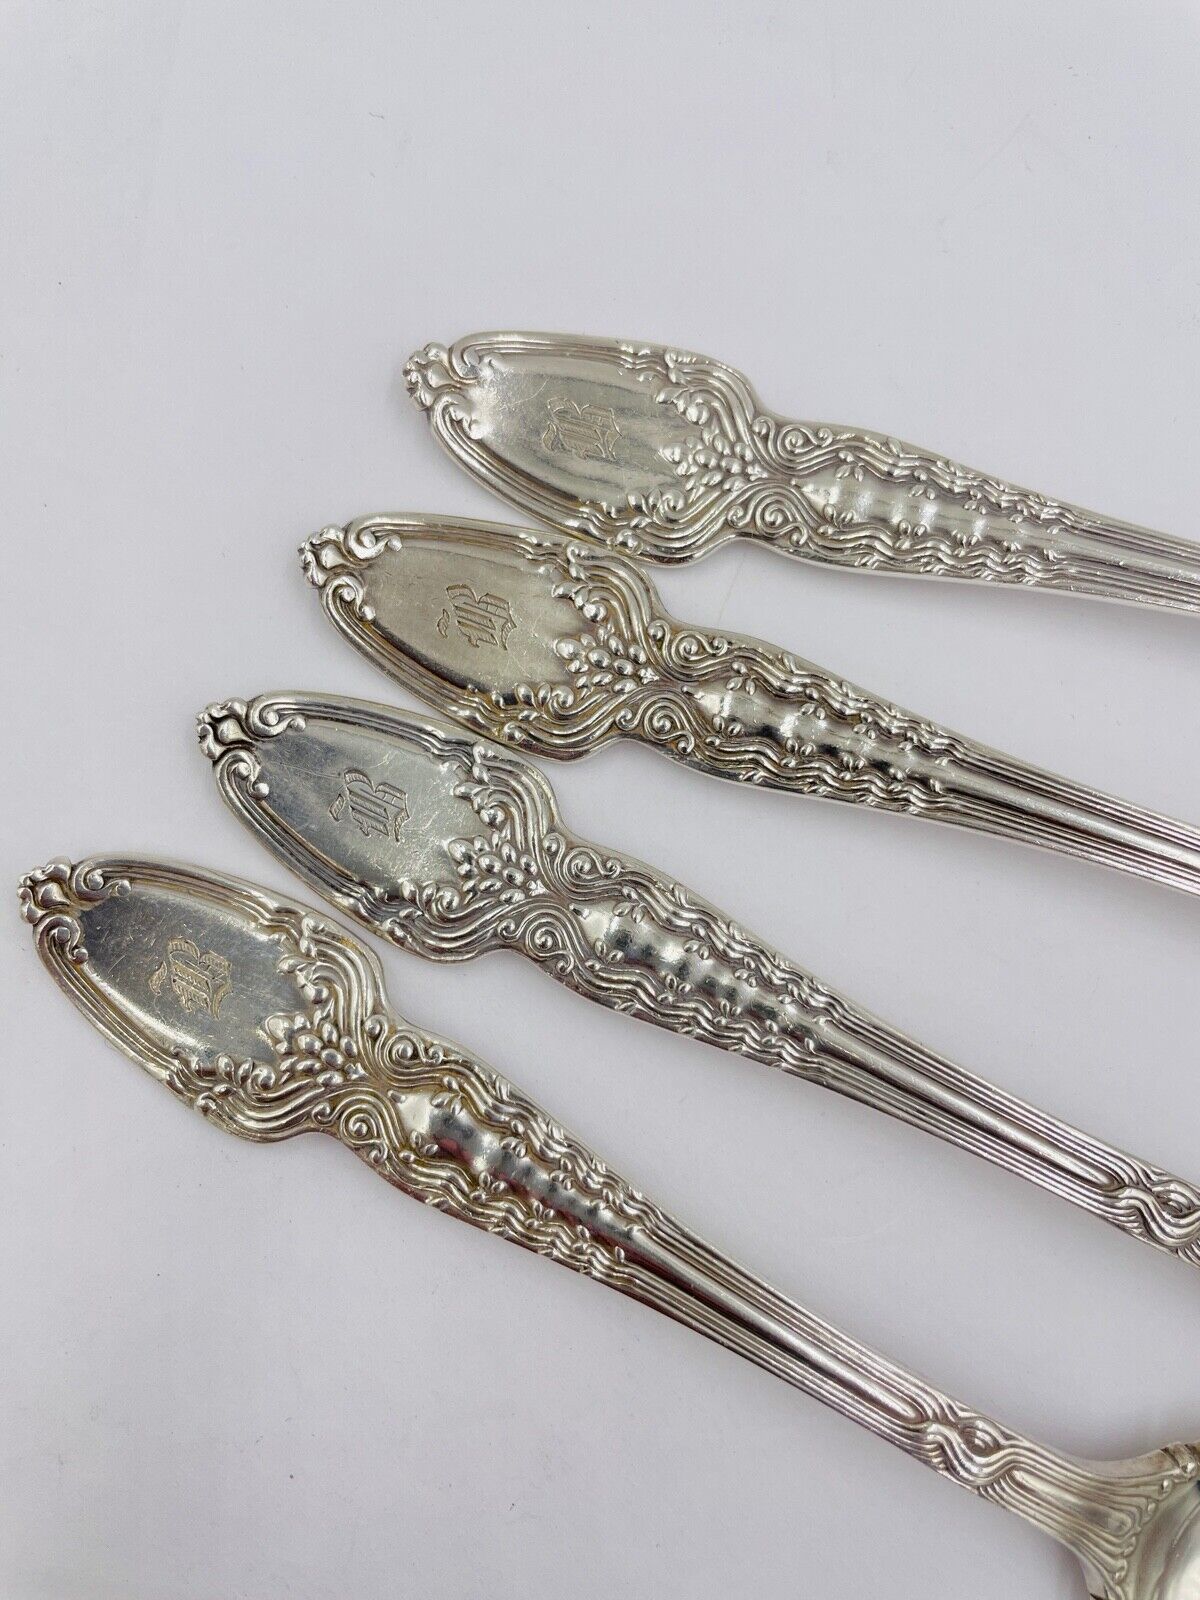 Broom Corn by Tiffany & Co. Sterling Silver Pastry Fork 4-tine 6" set of 4